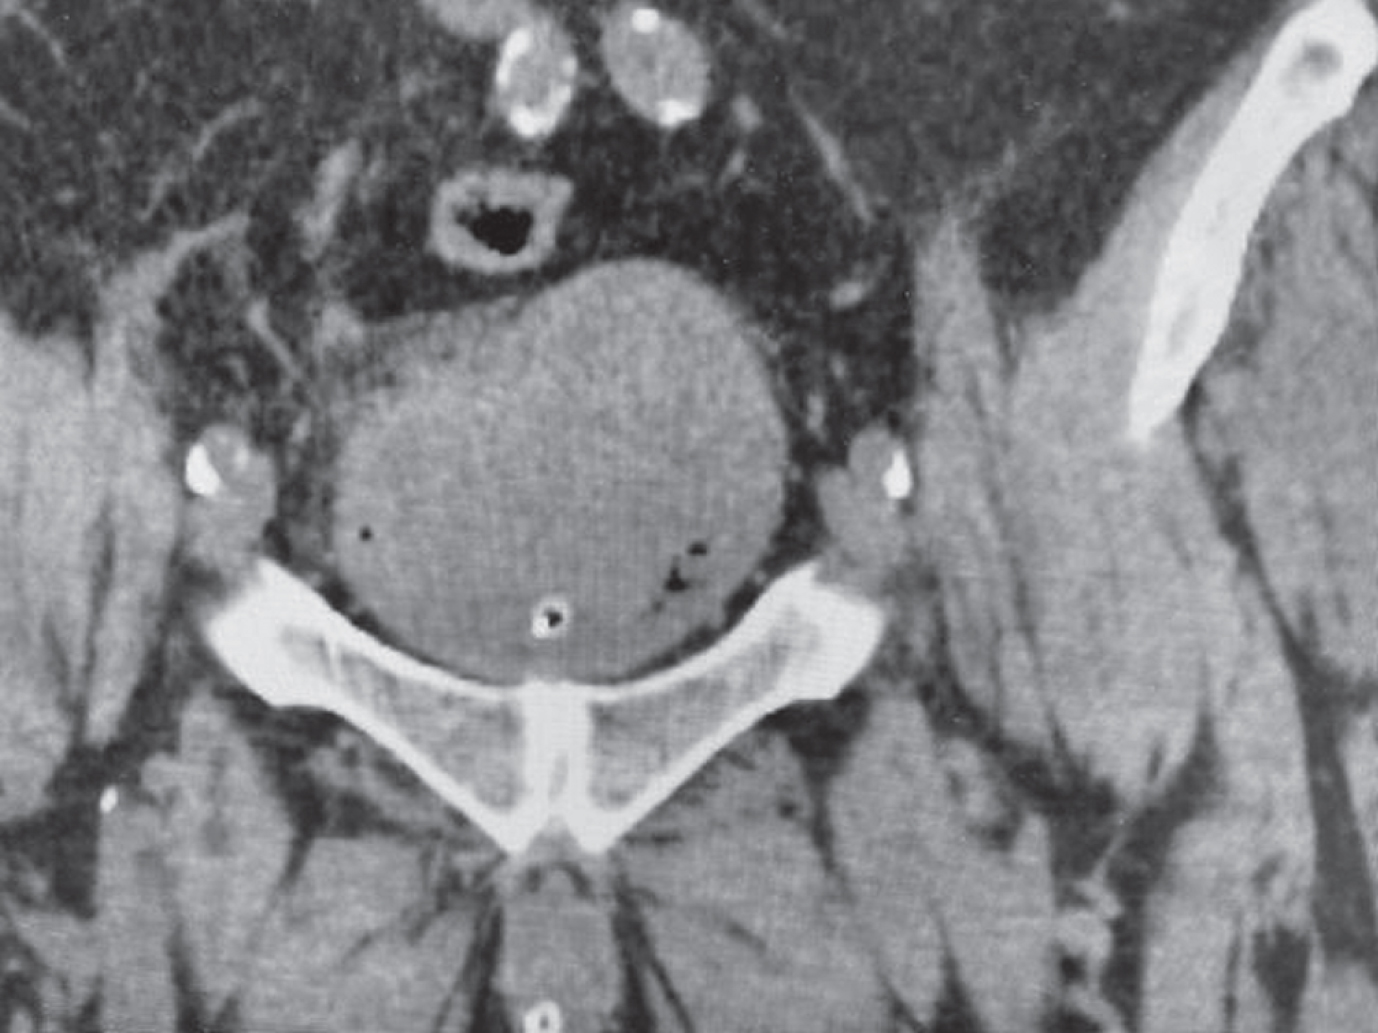 The non contrast CT scan identifies a large bladder mass.